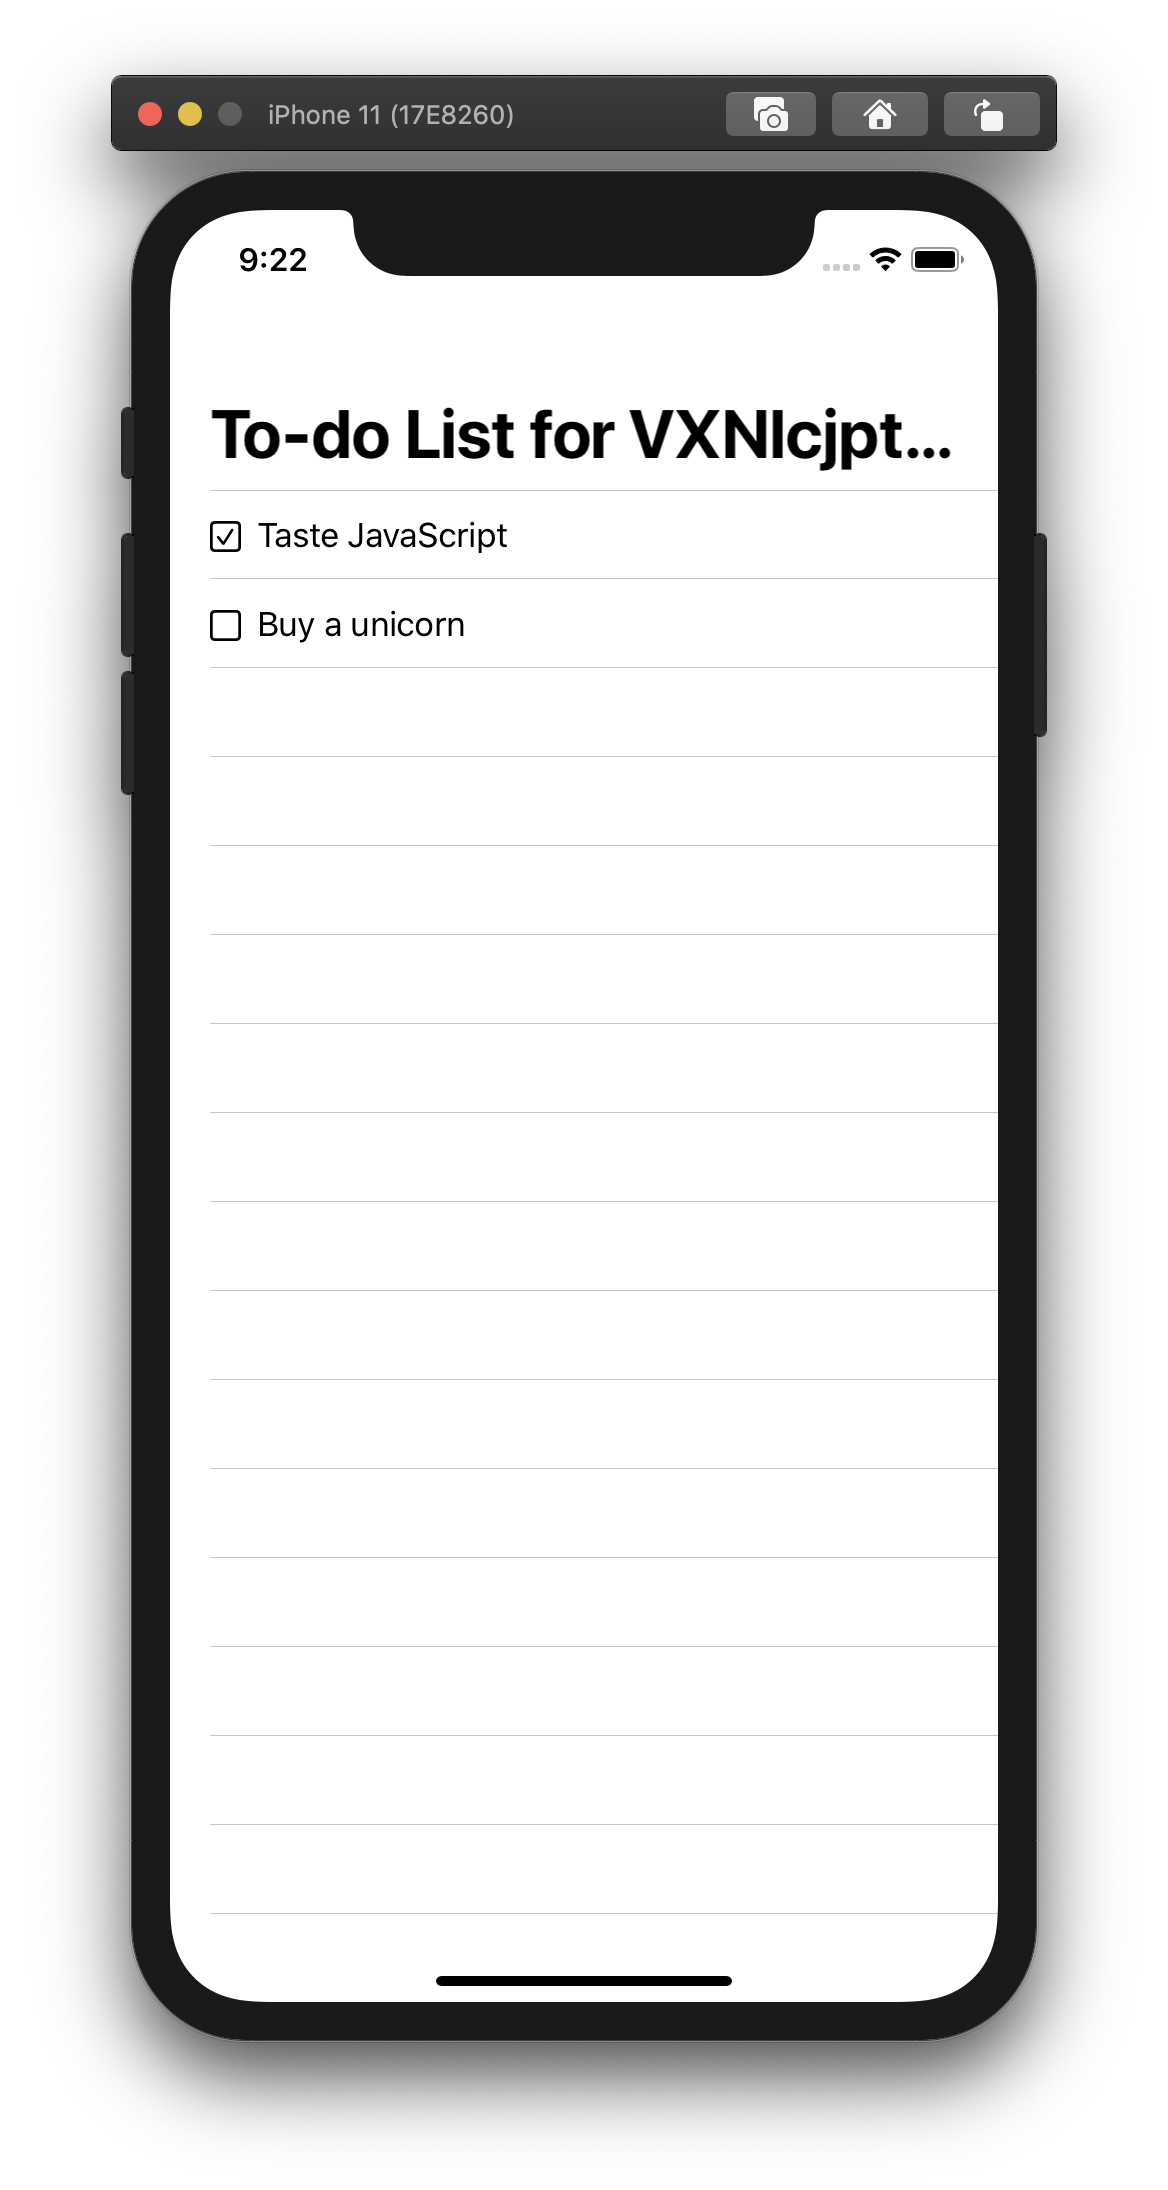 To-do list app running in the iOS simulator